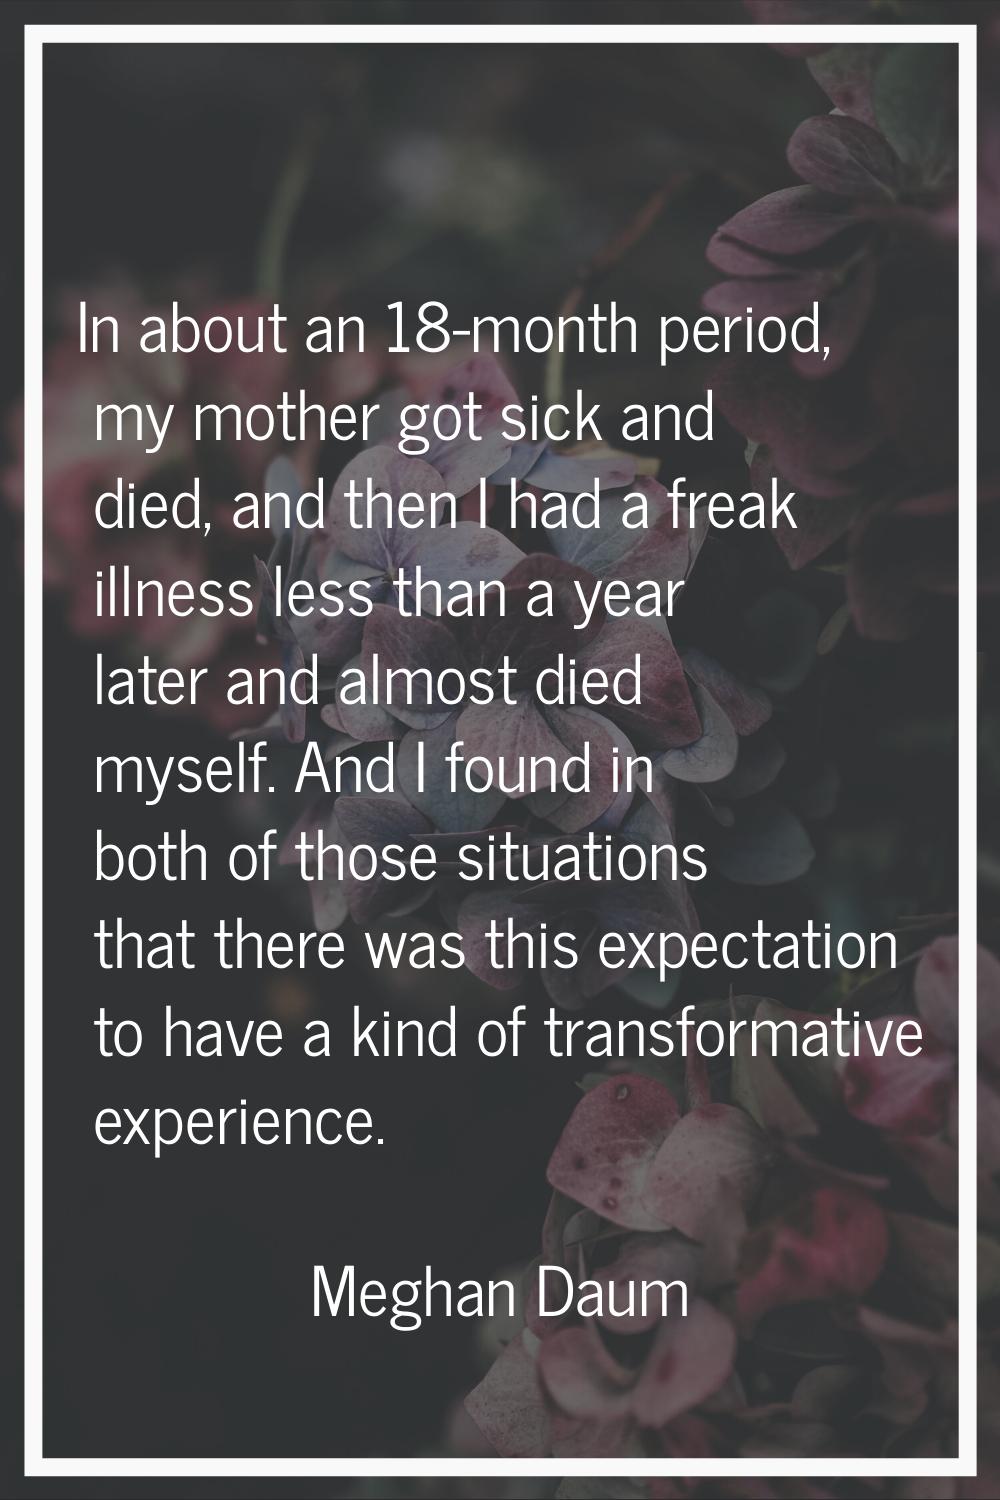 In about an 18-month period, my mother got sick and died, and then I had a freak illness less than 